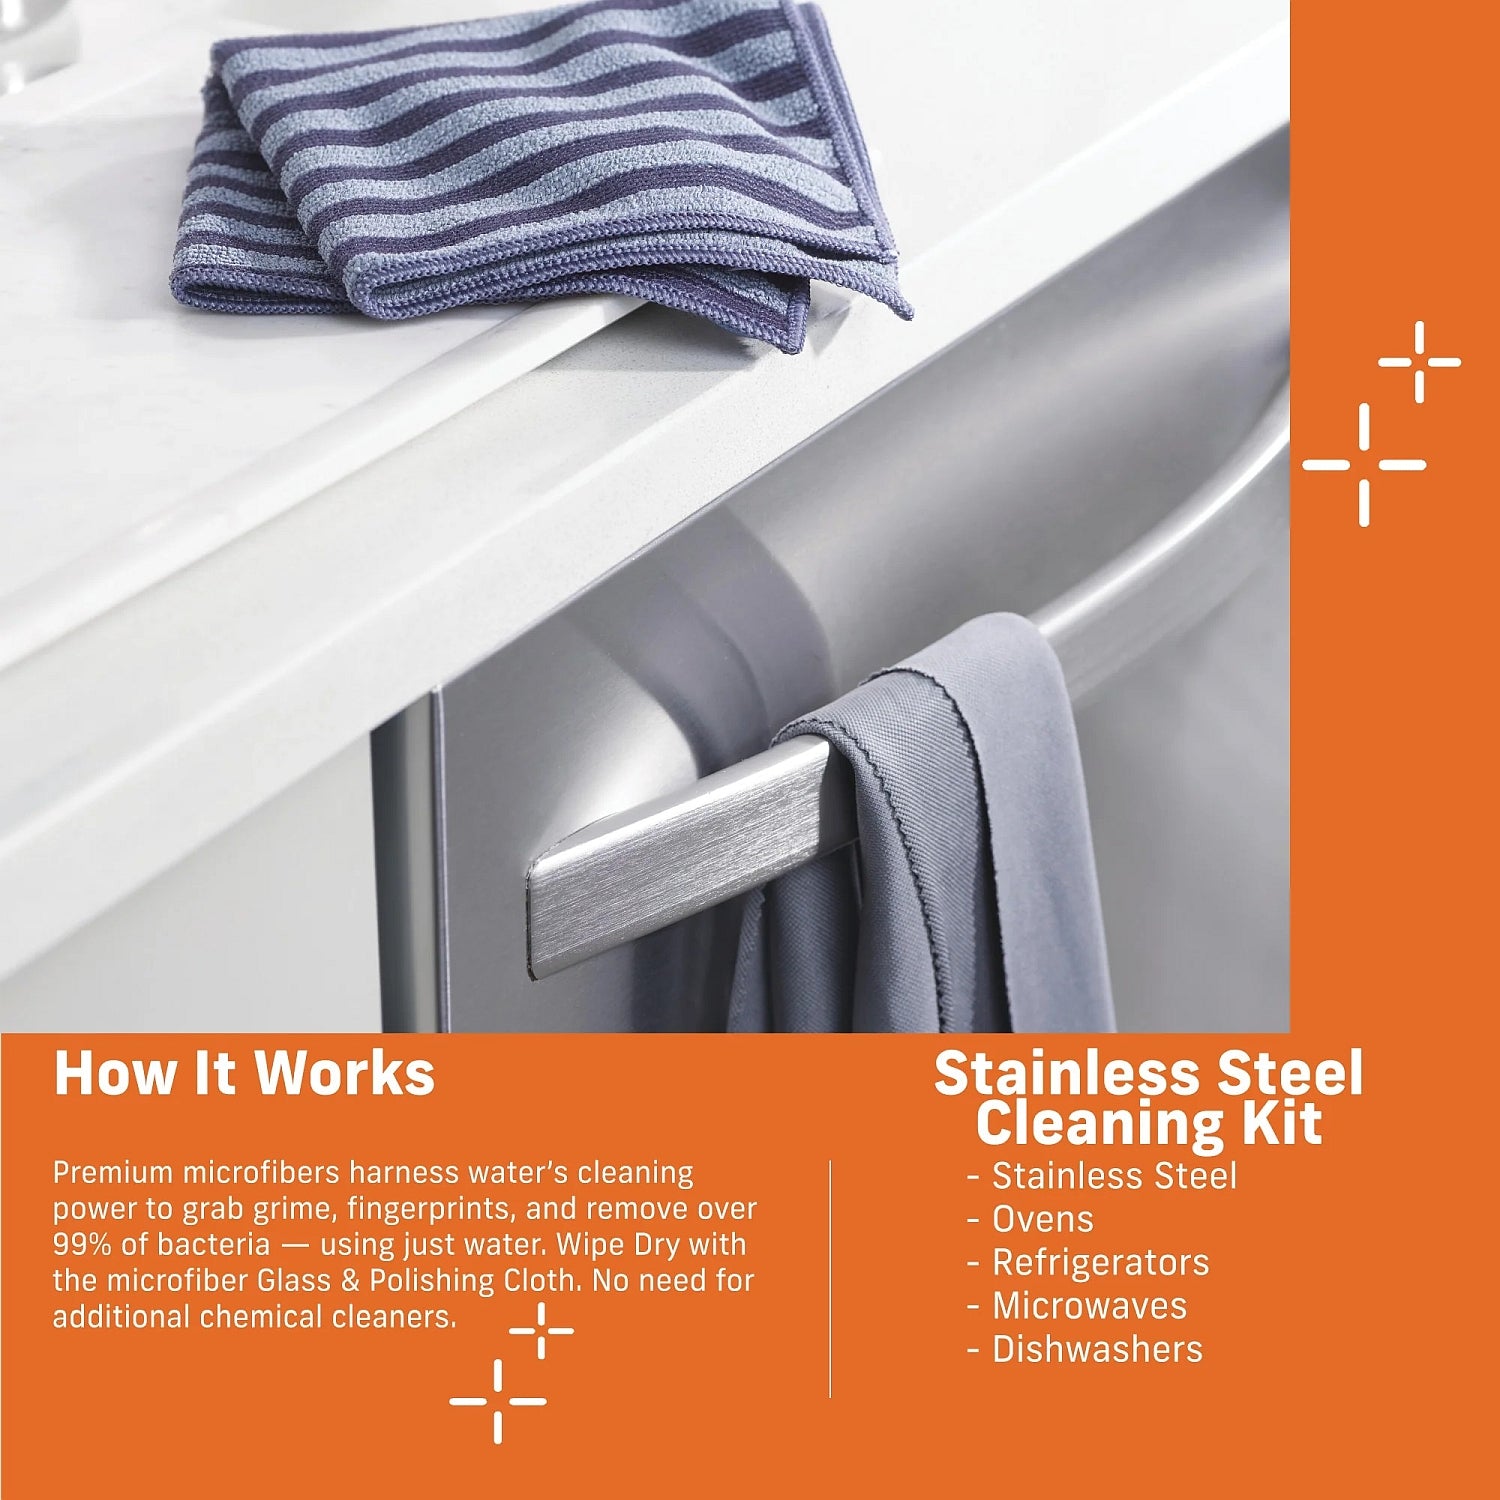 E - Cloth Stainless Steel Cleaning Kit - Buckhead Vacuums